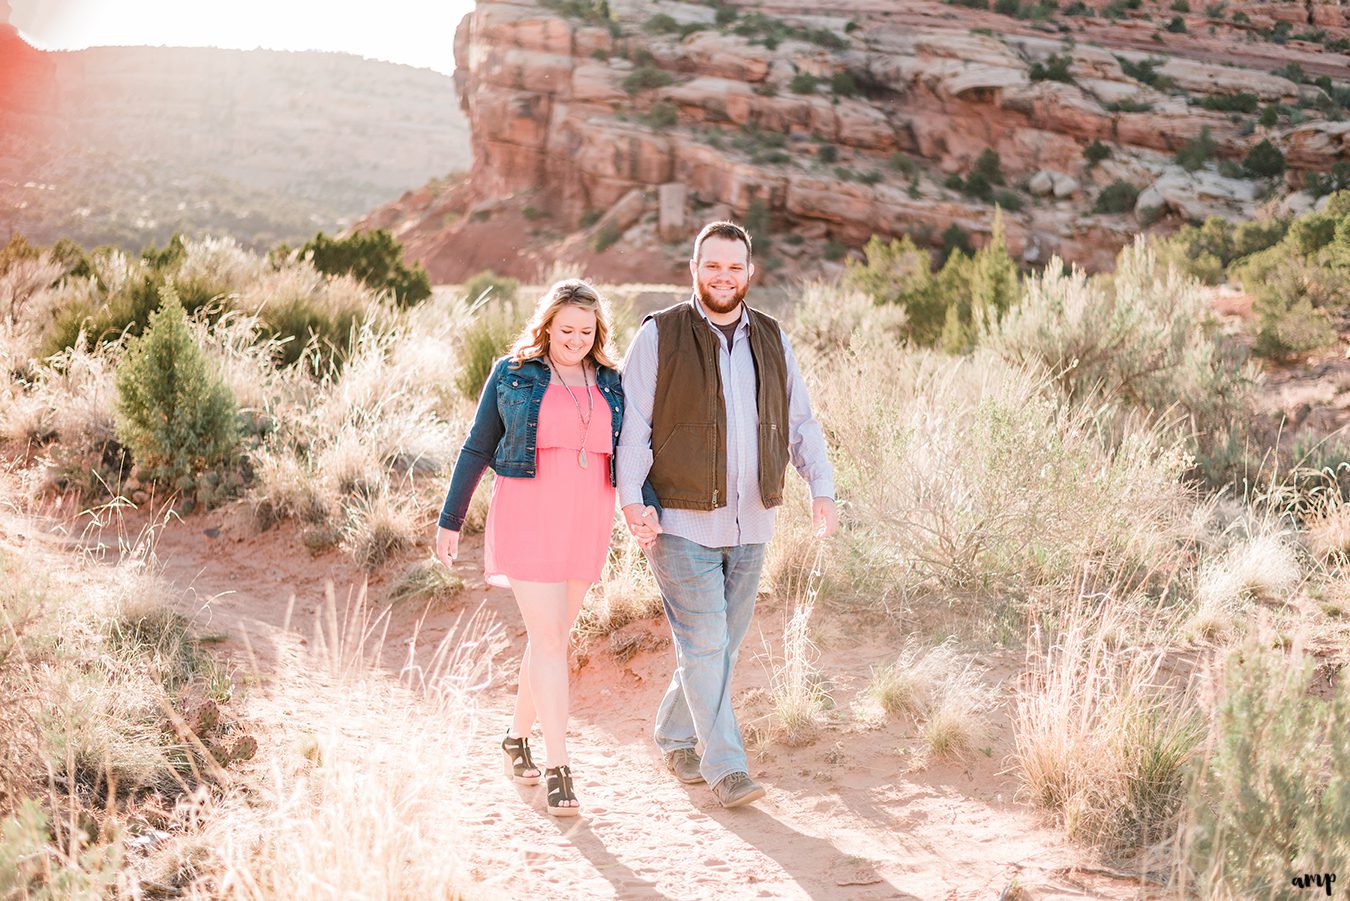 Dessa and Ben walking through the Colorado National Monument for their engagement photos